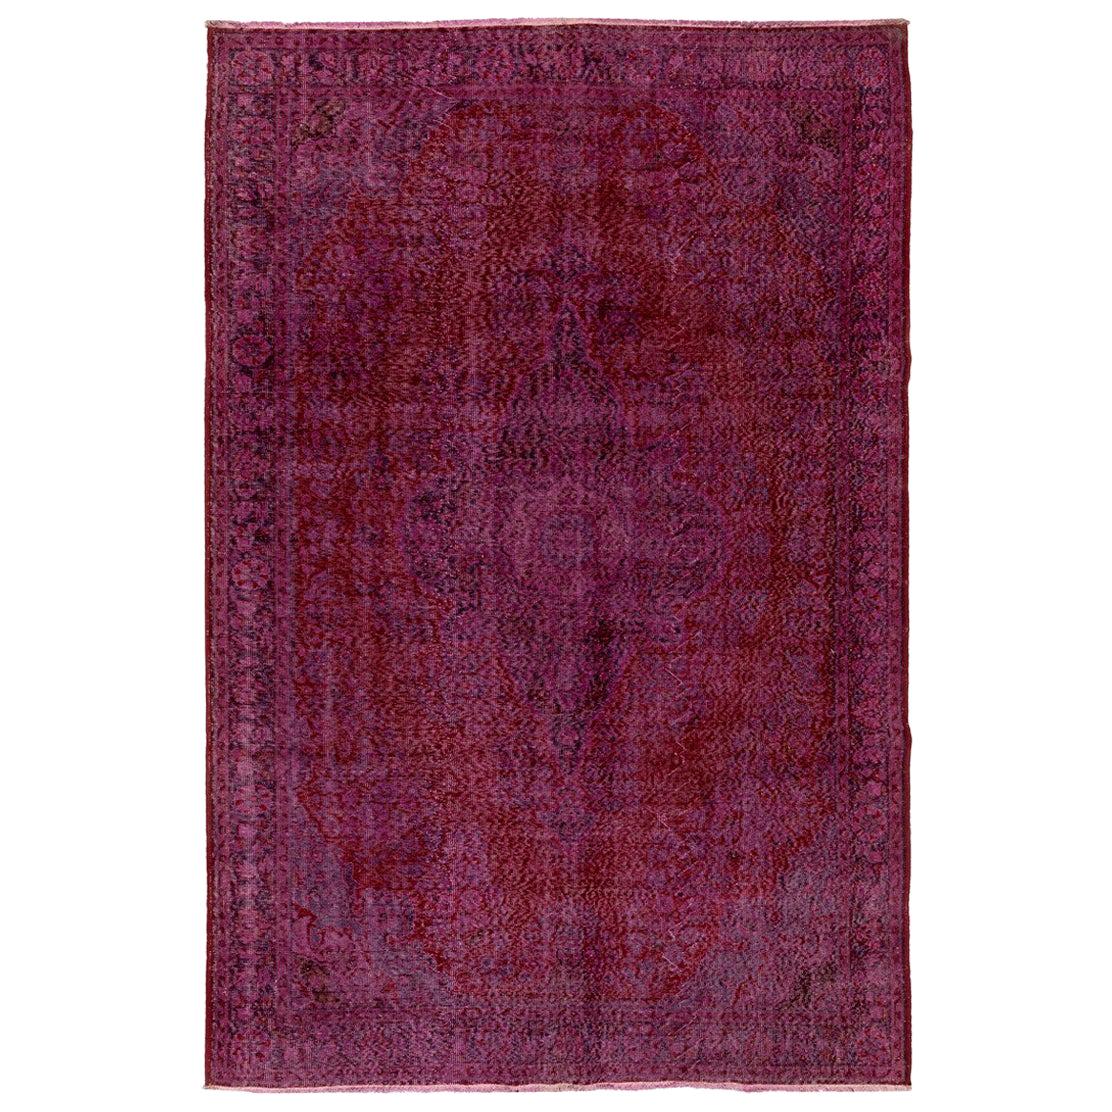 7x10.2 Ft Vintage Hand-knotted Over-dyed Turkish Wool Rug in Burgundy Red